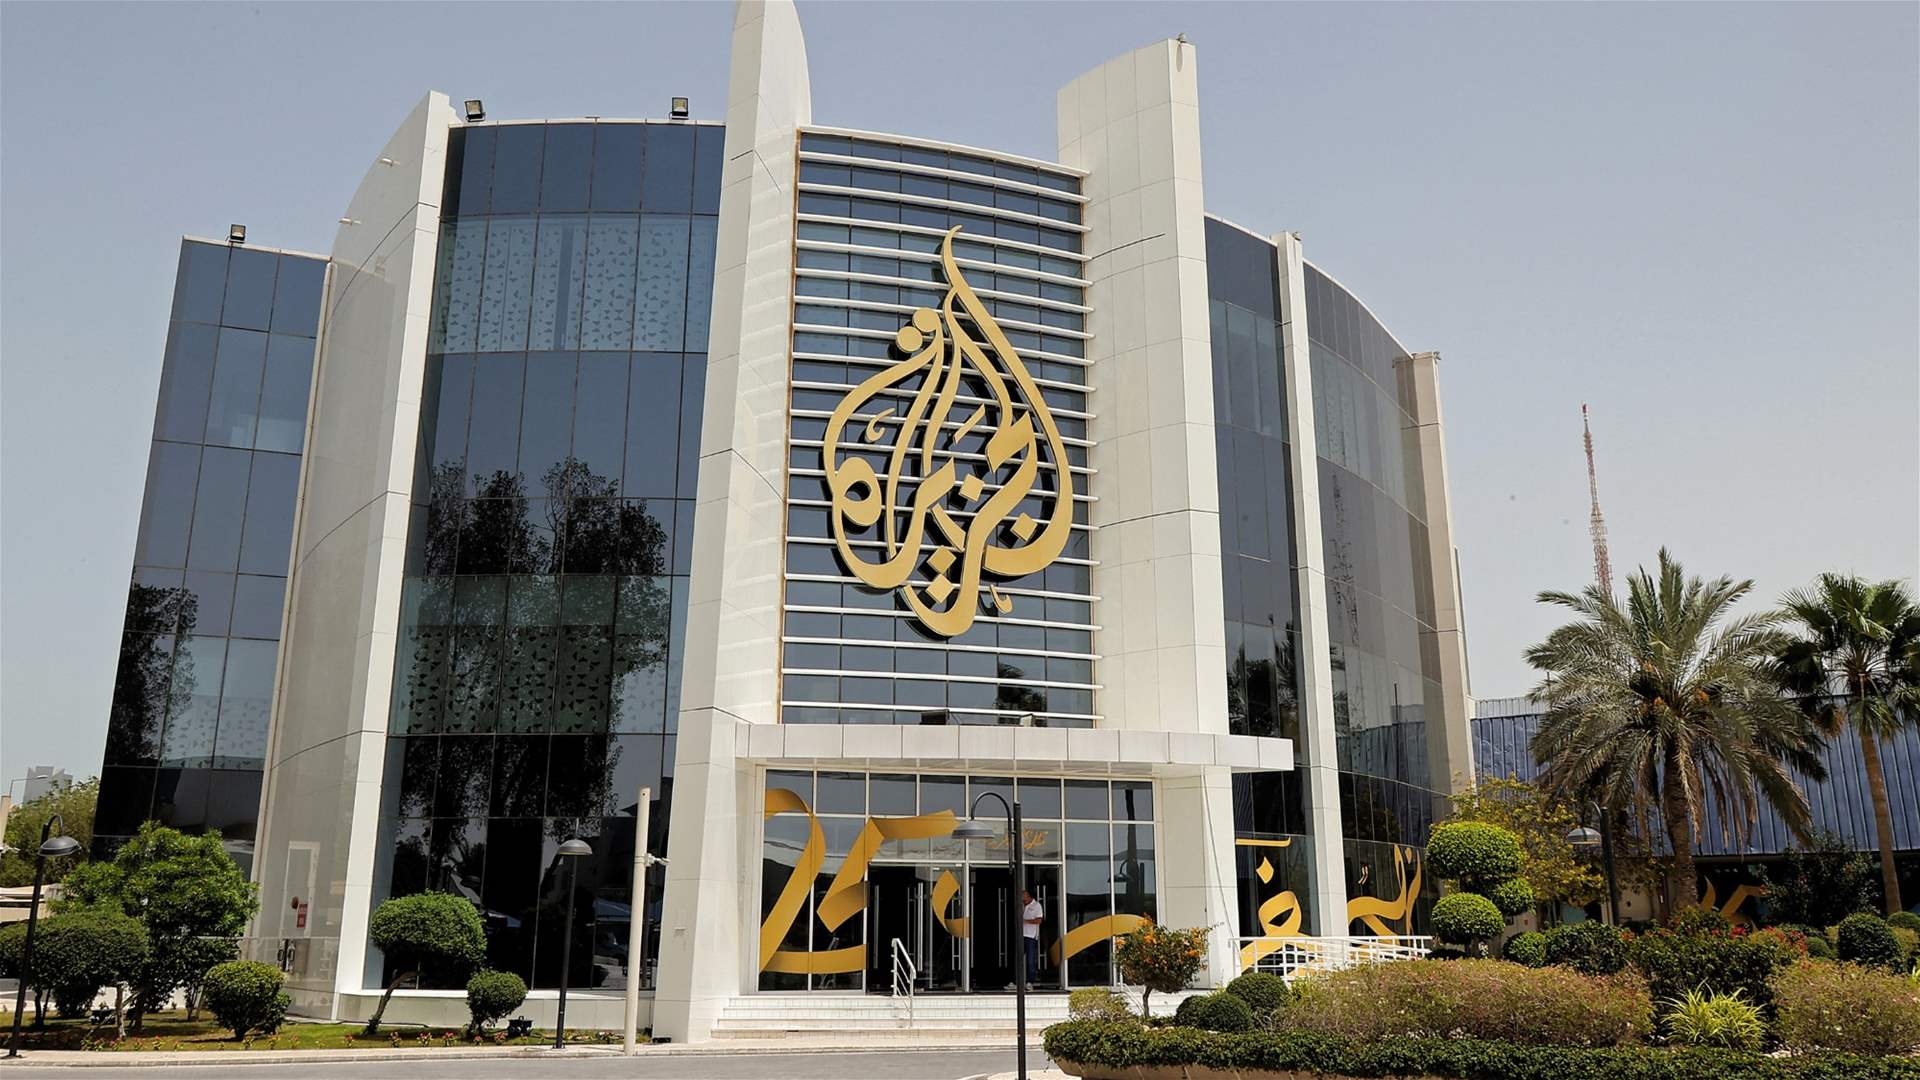 Hamas: Israel&#39;s decision to close Al Jazeera aims to &#39;hide the truth&#39; about Gaza war